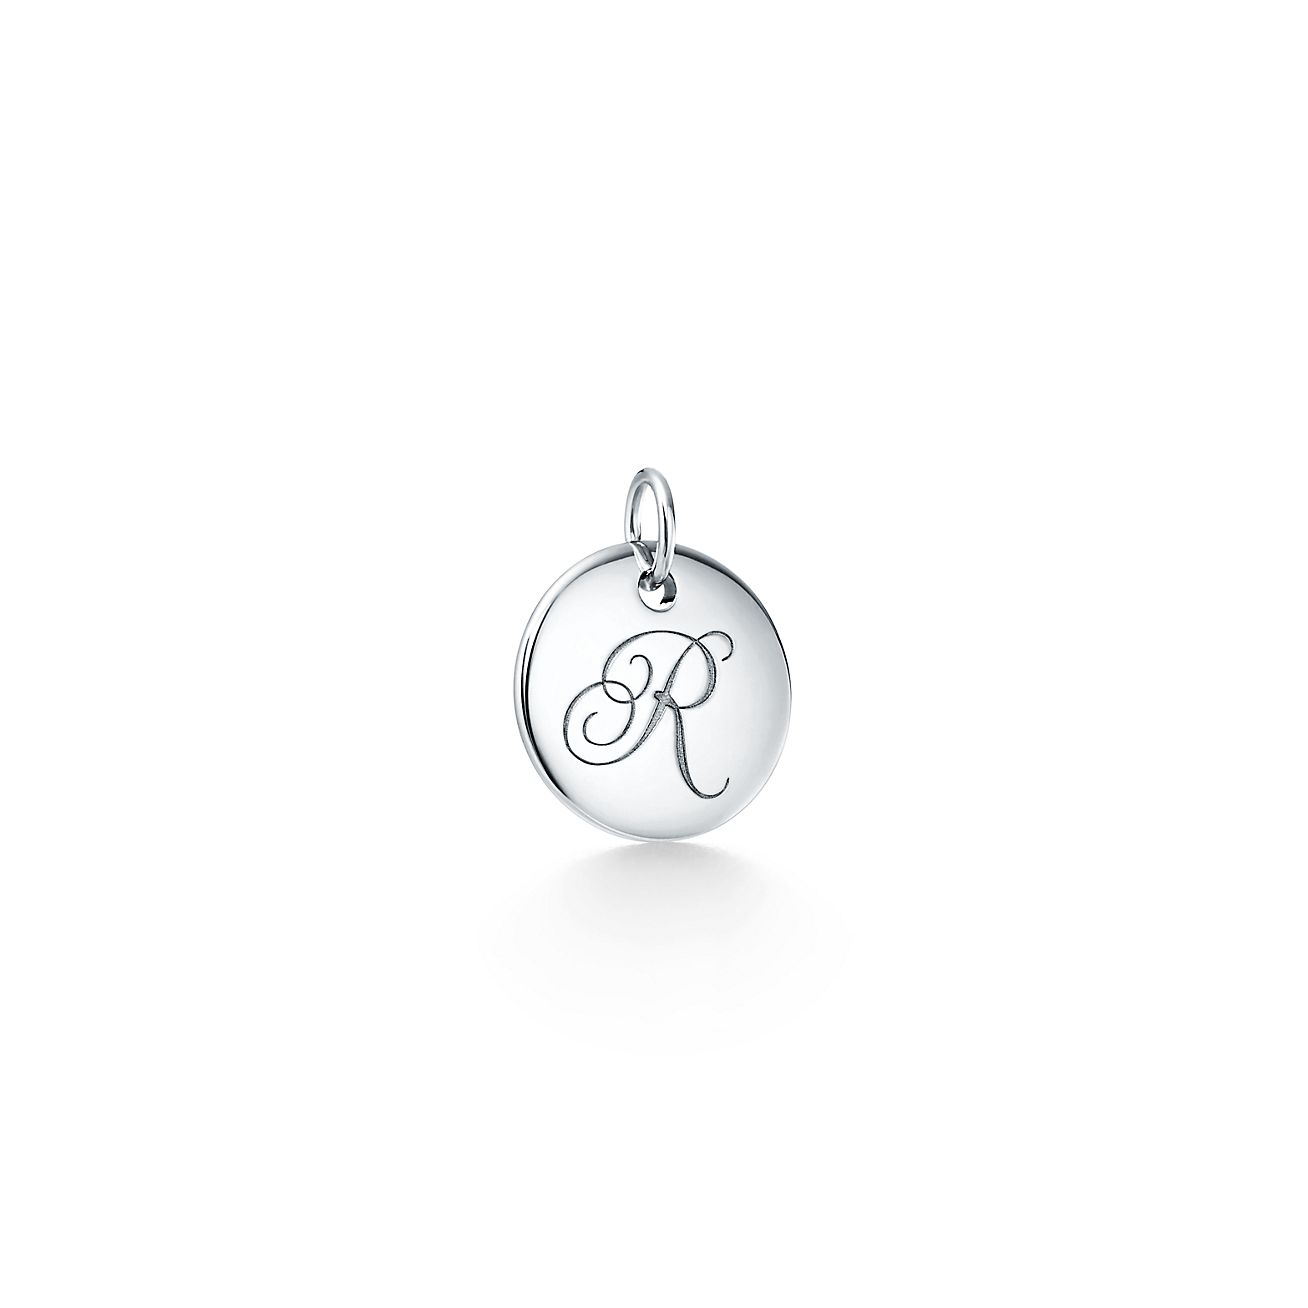 Tiffany Notes R Disc Charm in Silver, A 